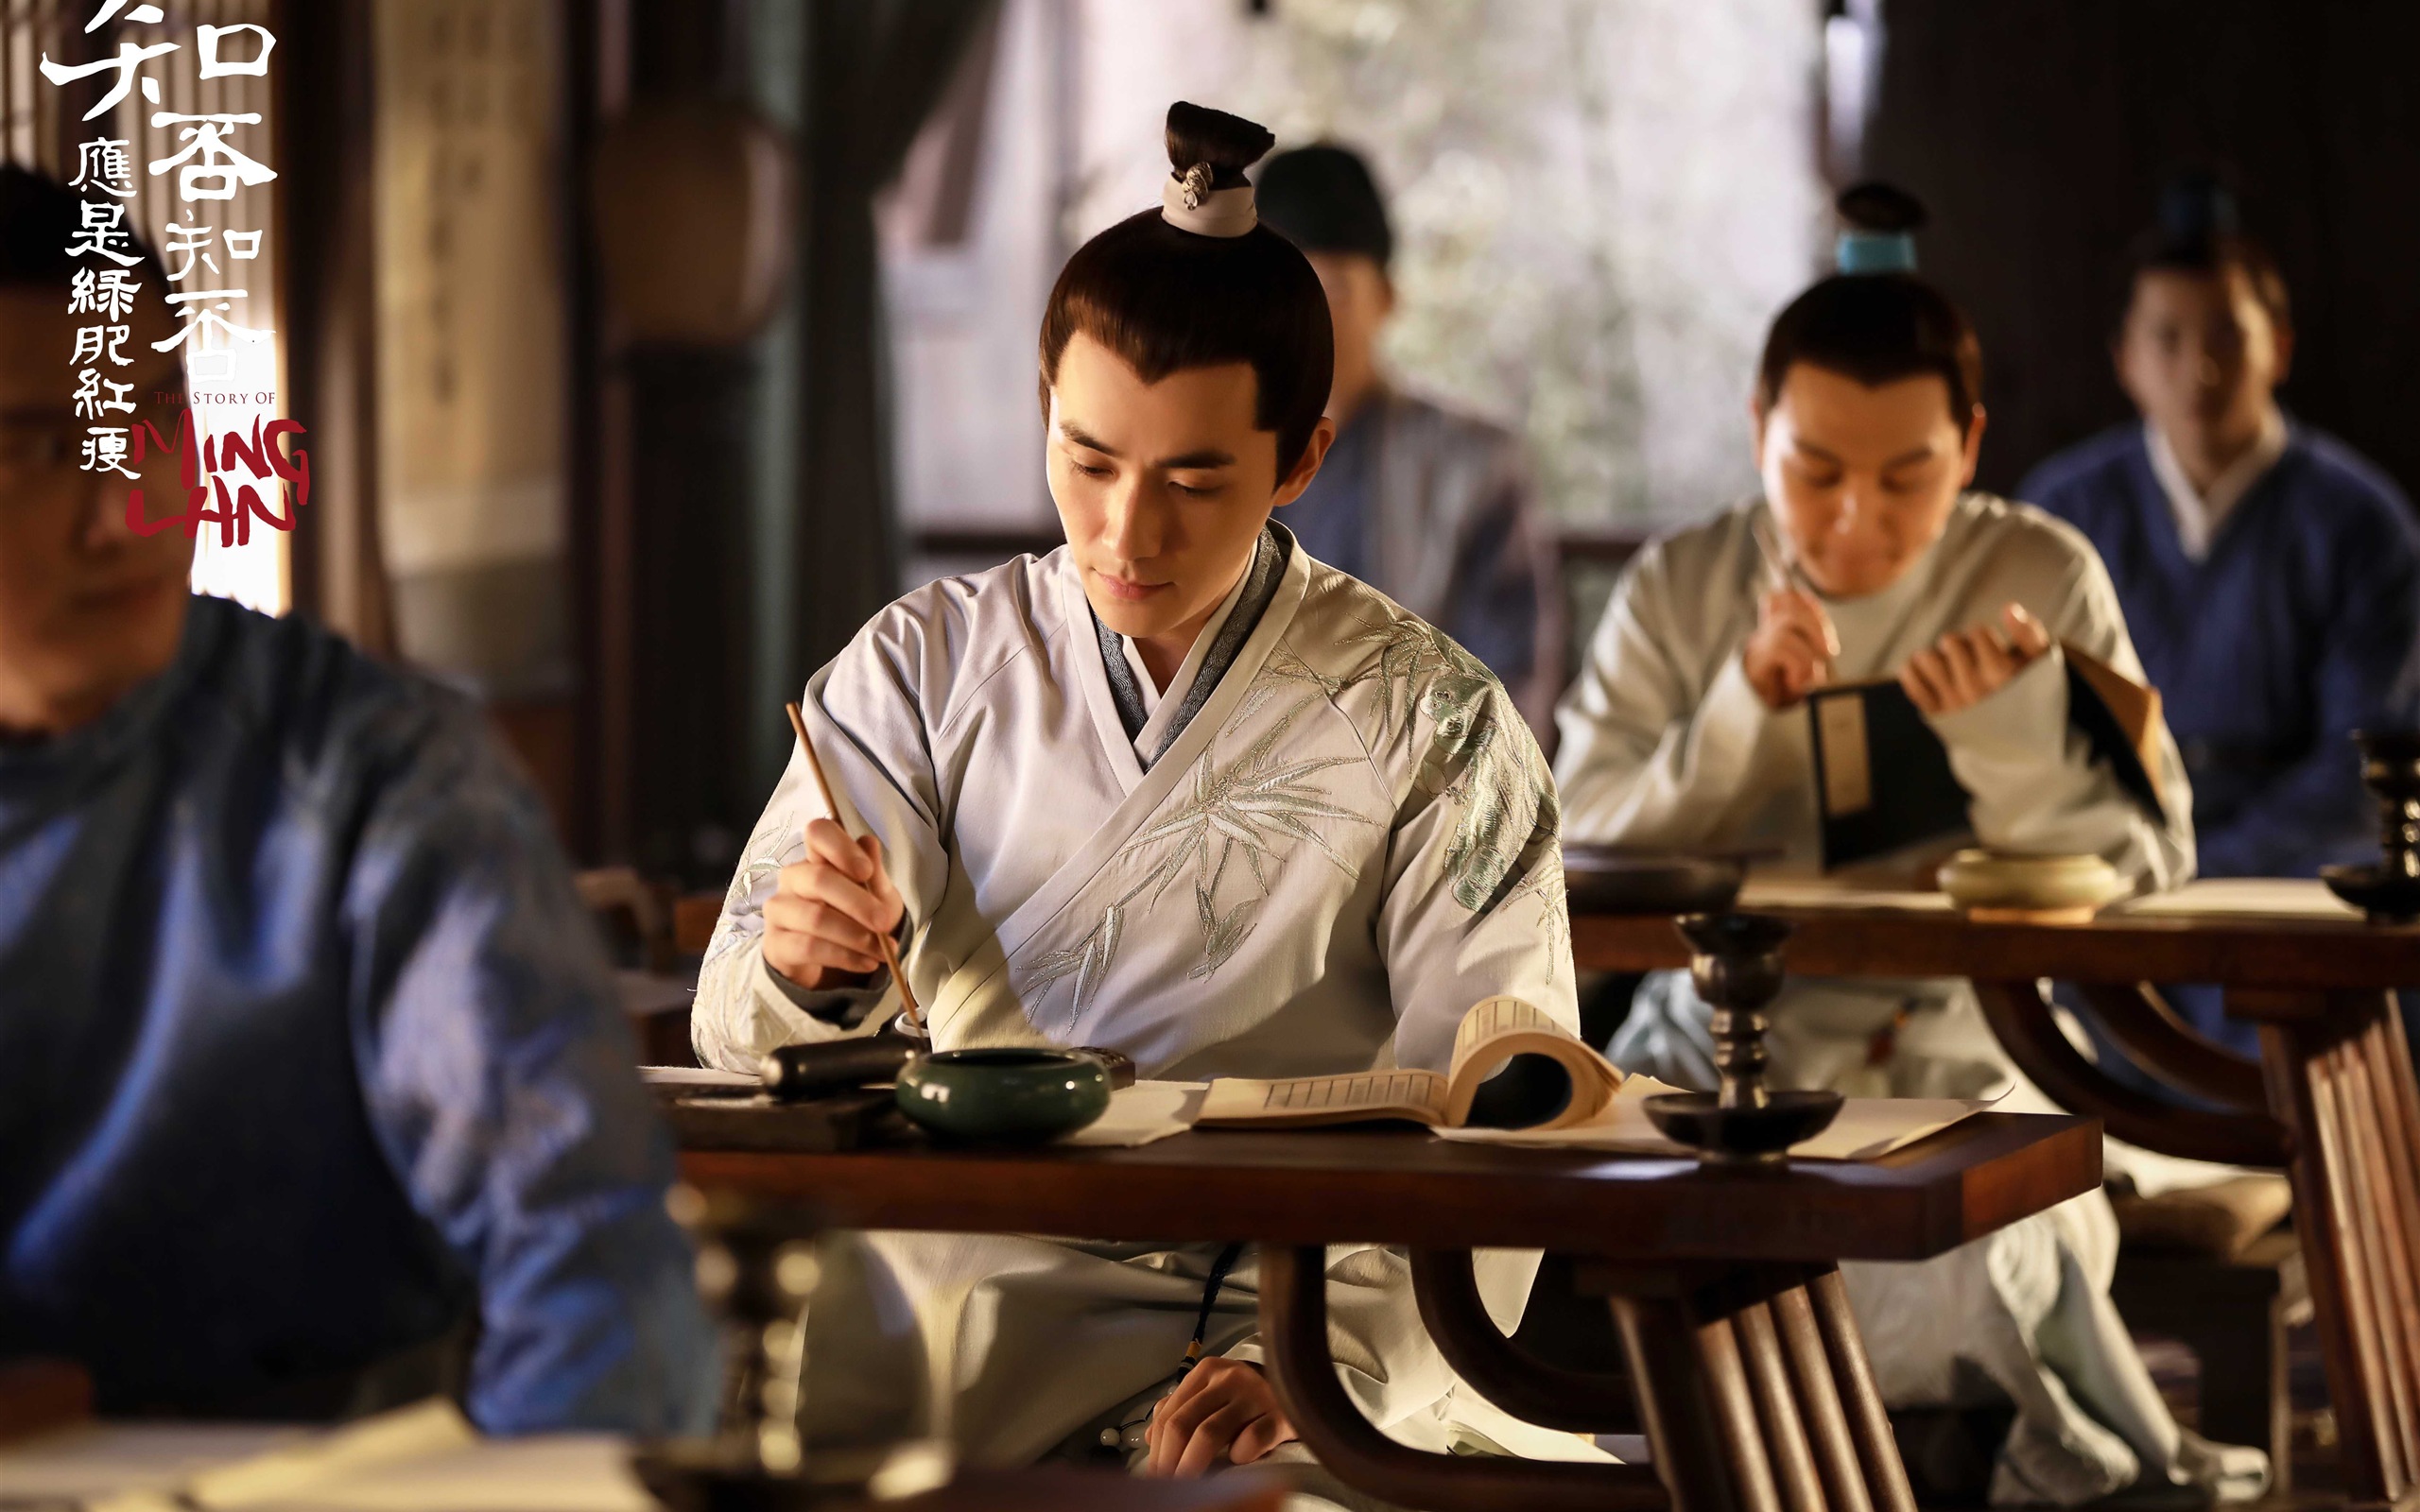 The Story Of MingLan, TV series HD wallpapers #37 - 2560x1600